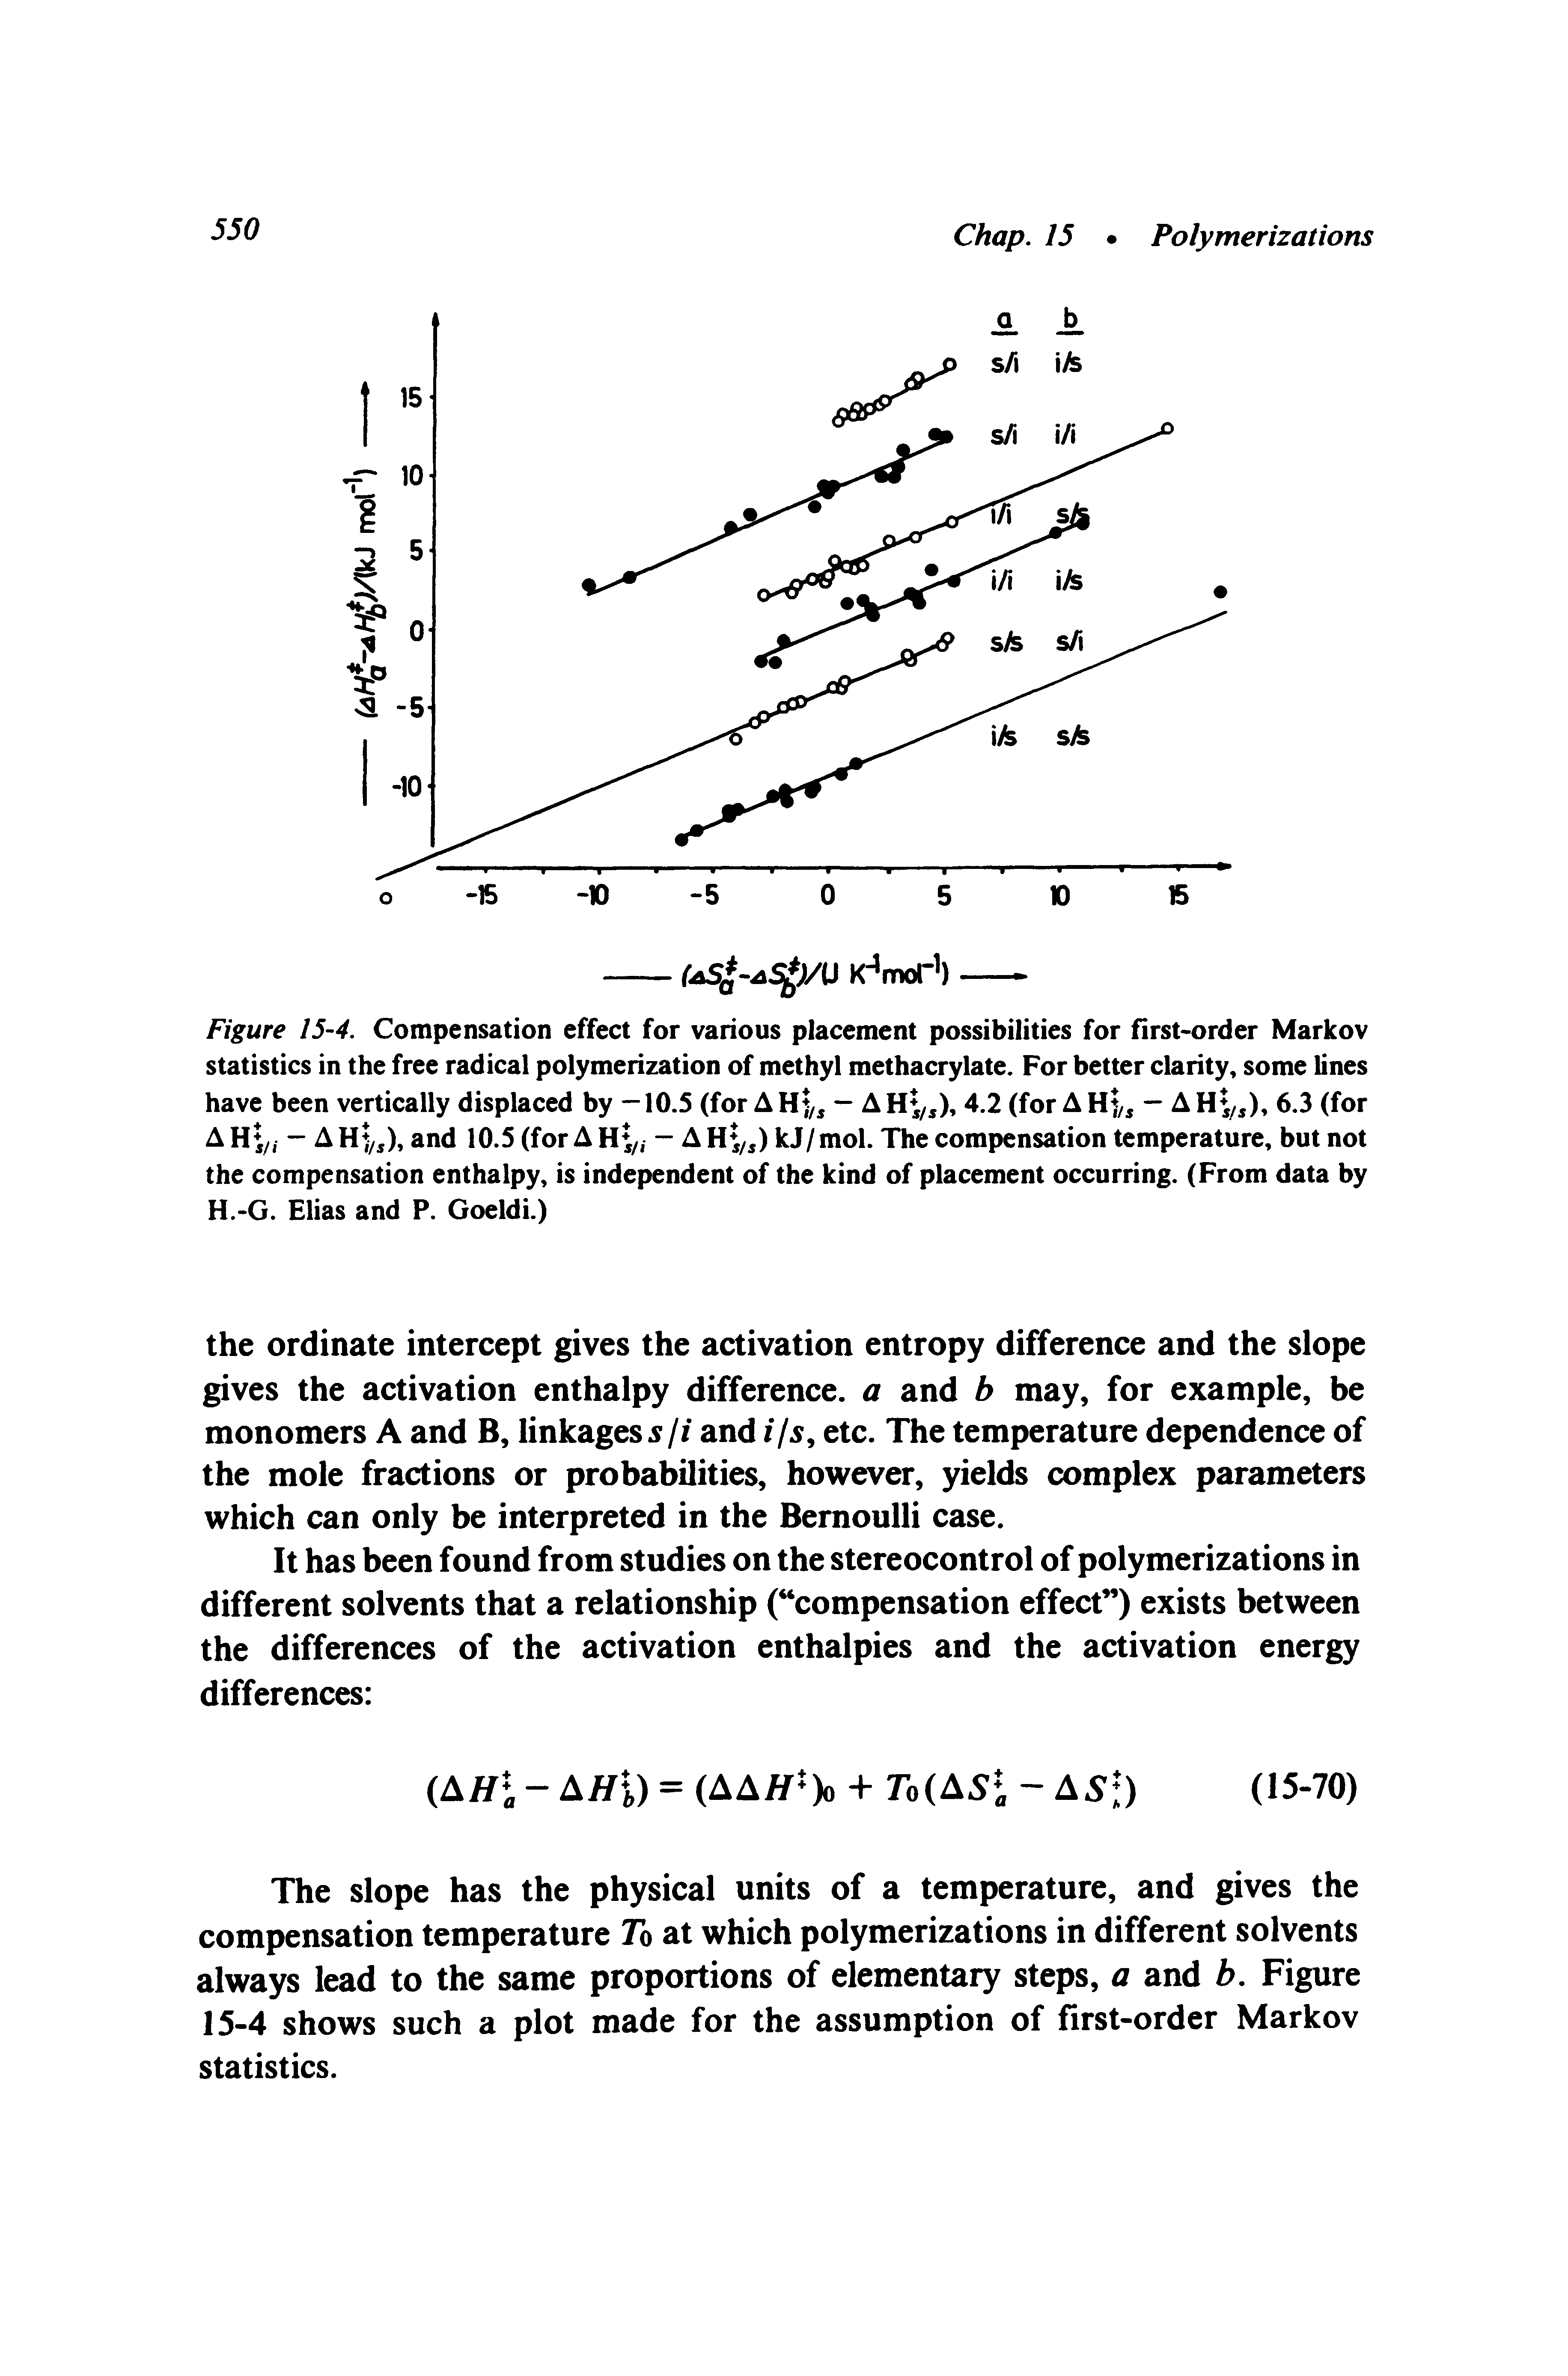 Figure 15-4. Compensation effect for various placement possibilities for first-order Markov statistics in the free radical polymerization of methyl methacrylate. For better clarity, some lines have been vertically displaced by -10.5 (for AHj/, - AH /,), 4.2 (for AH, - AH /,), 6.3 (for A H /, - A H /,), and 10.5 (for A H /, - A H /,) kJ/mol. The compensation temperature, but not the compensation enthalpy, is independent of the kind of placement occurring. (From data by H.-G. Elias and P. Goeldi.)...